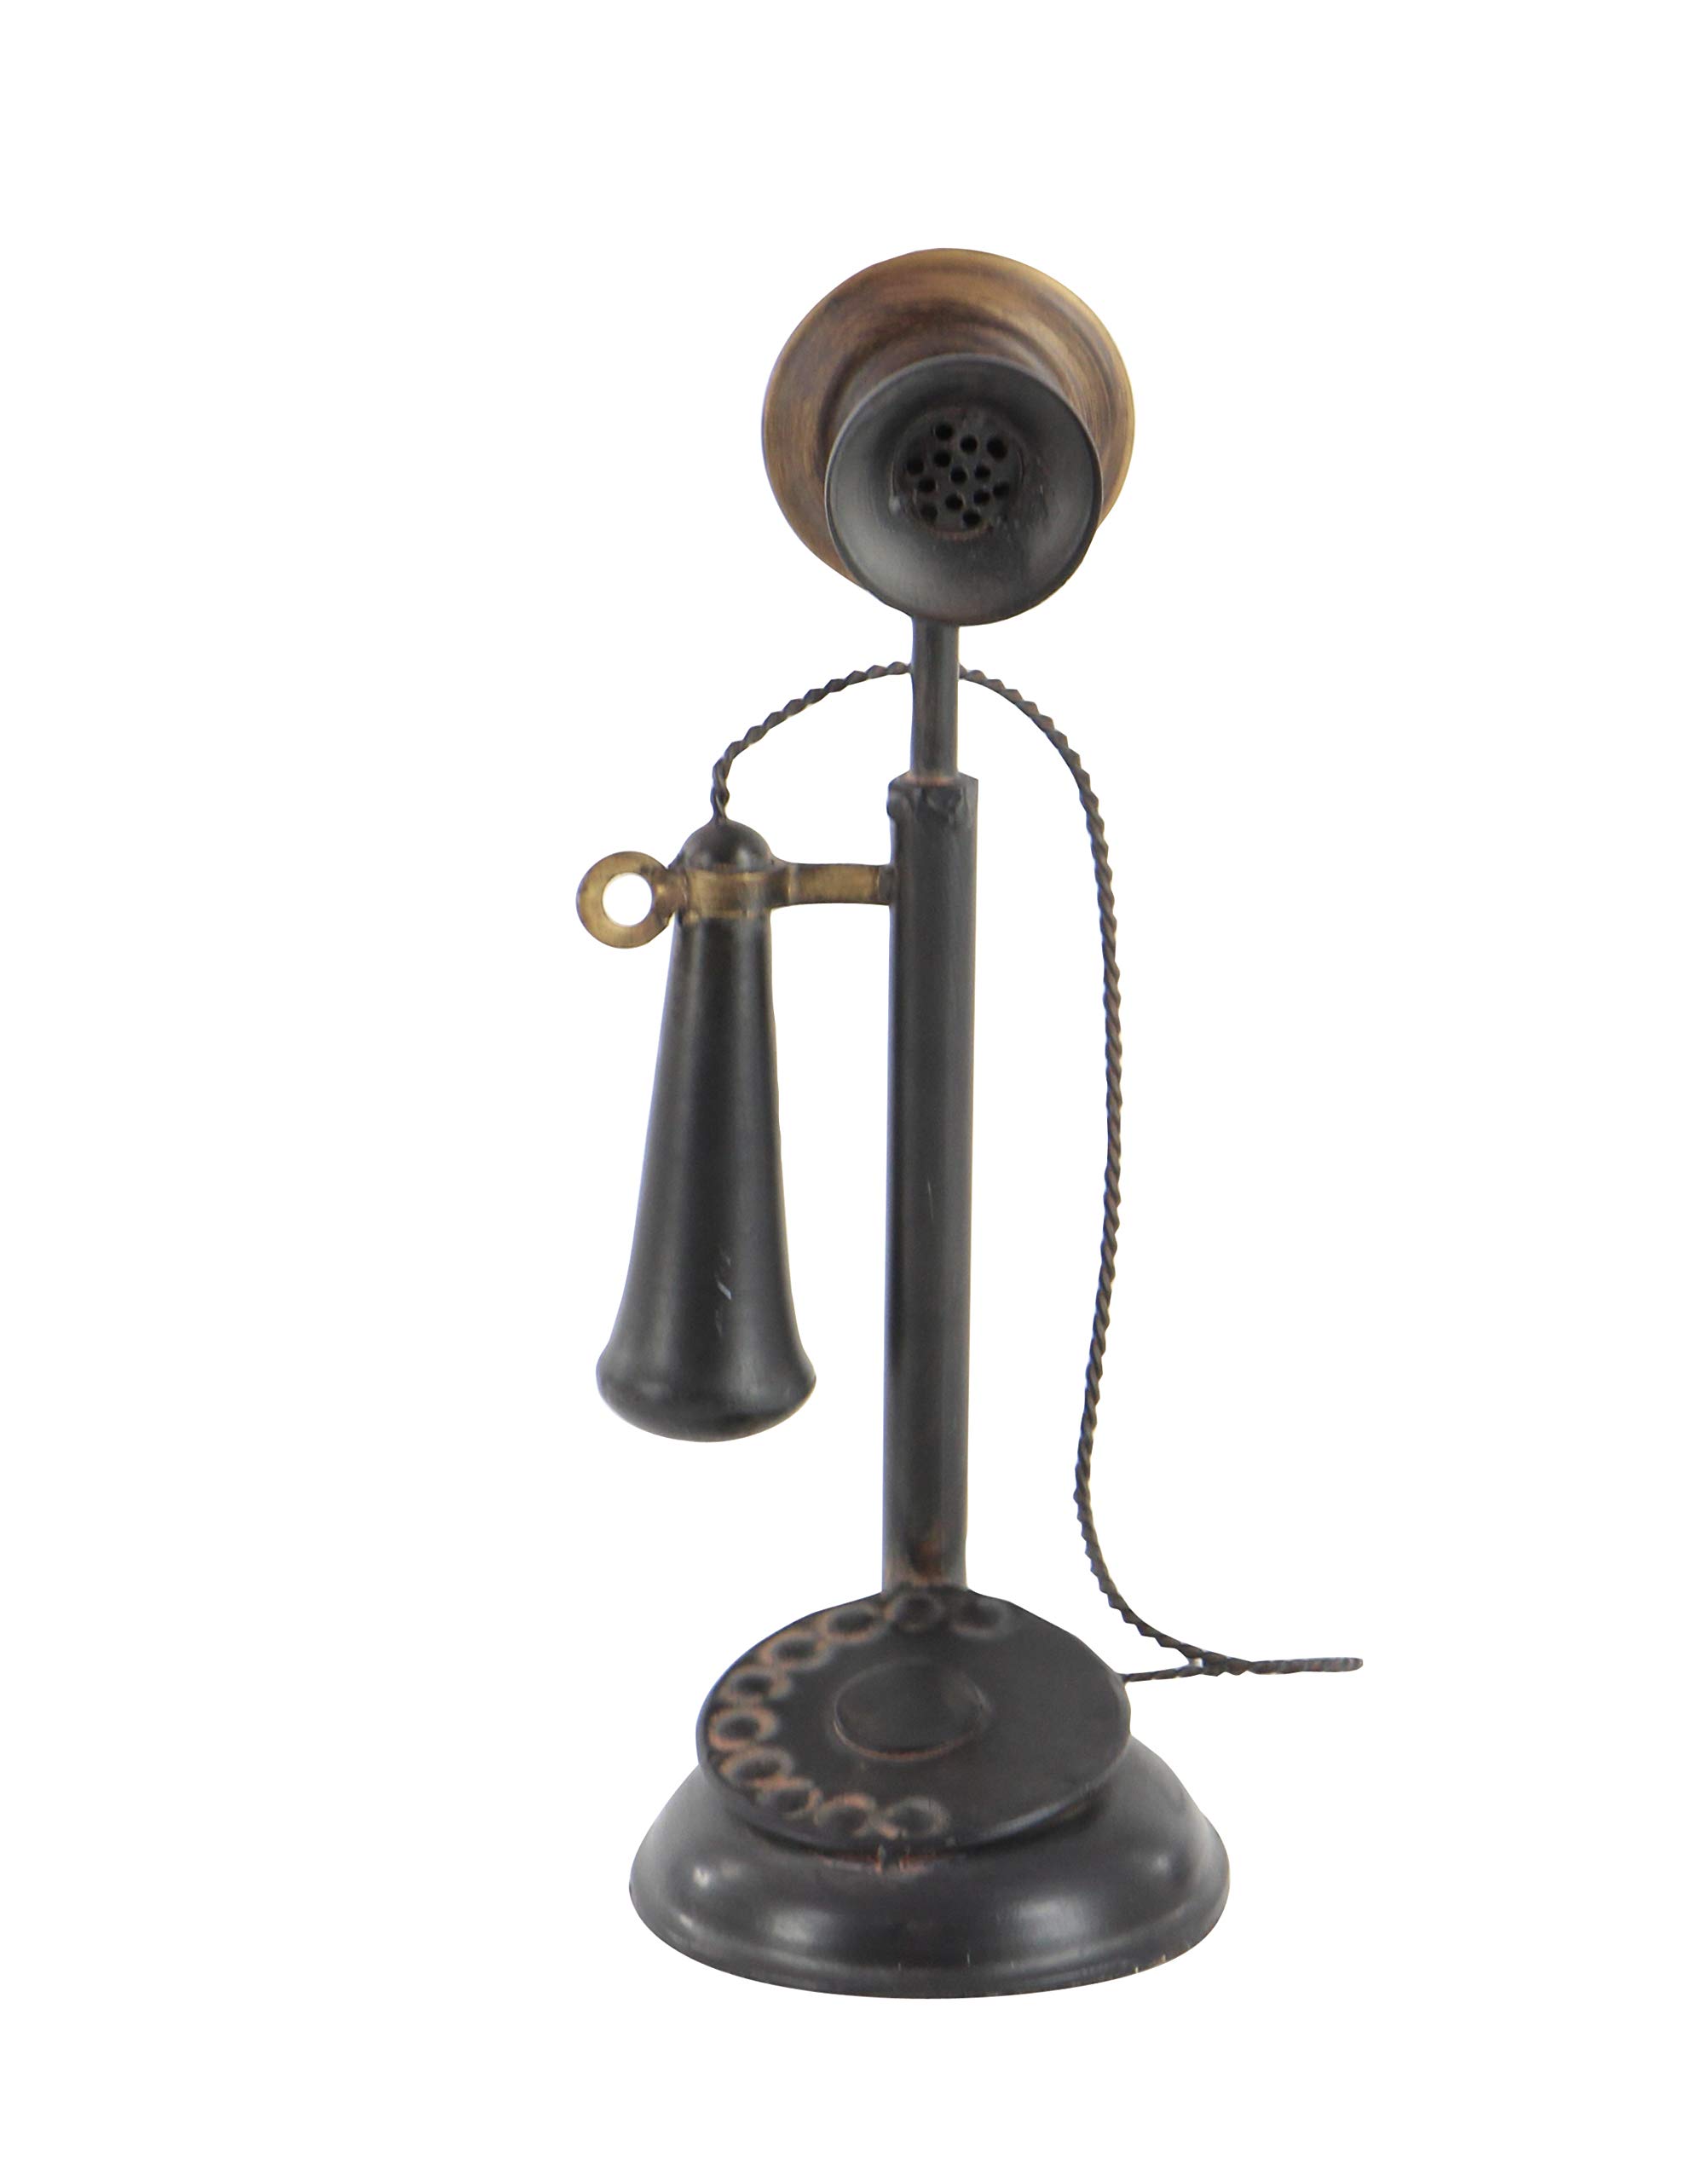 Deco 79 Metal Telephone Decorative Vintage Style Sculpture with Tiered Base and Coil Wire Detailing, 5